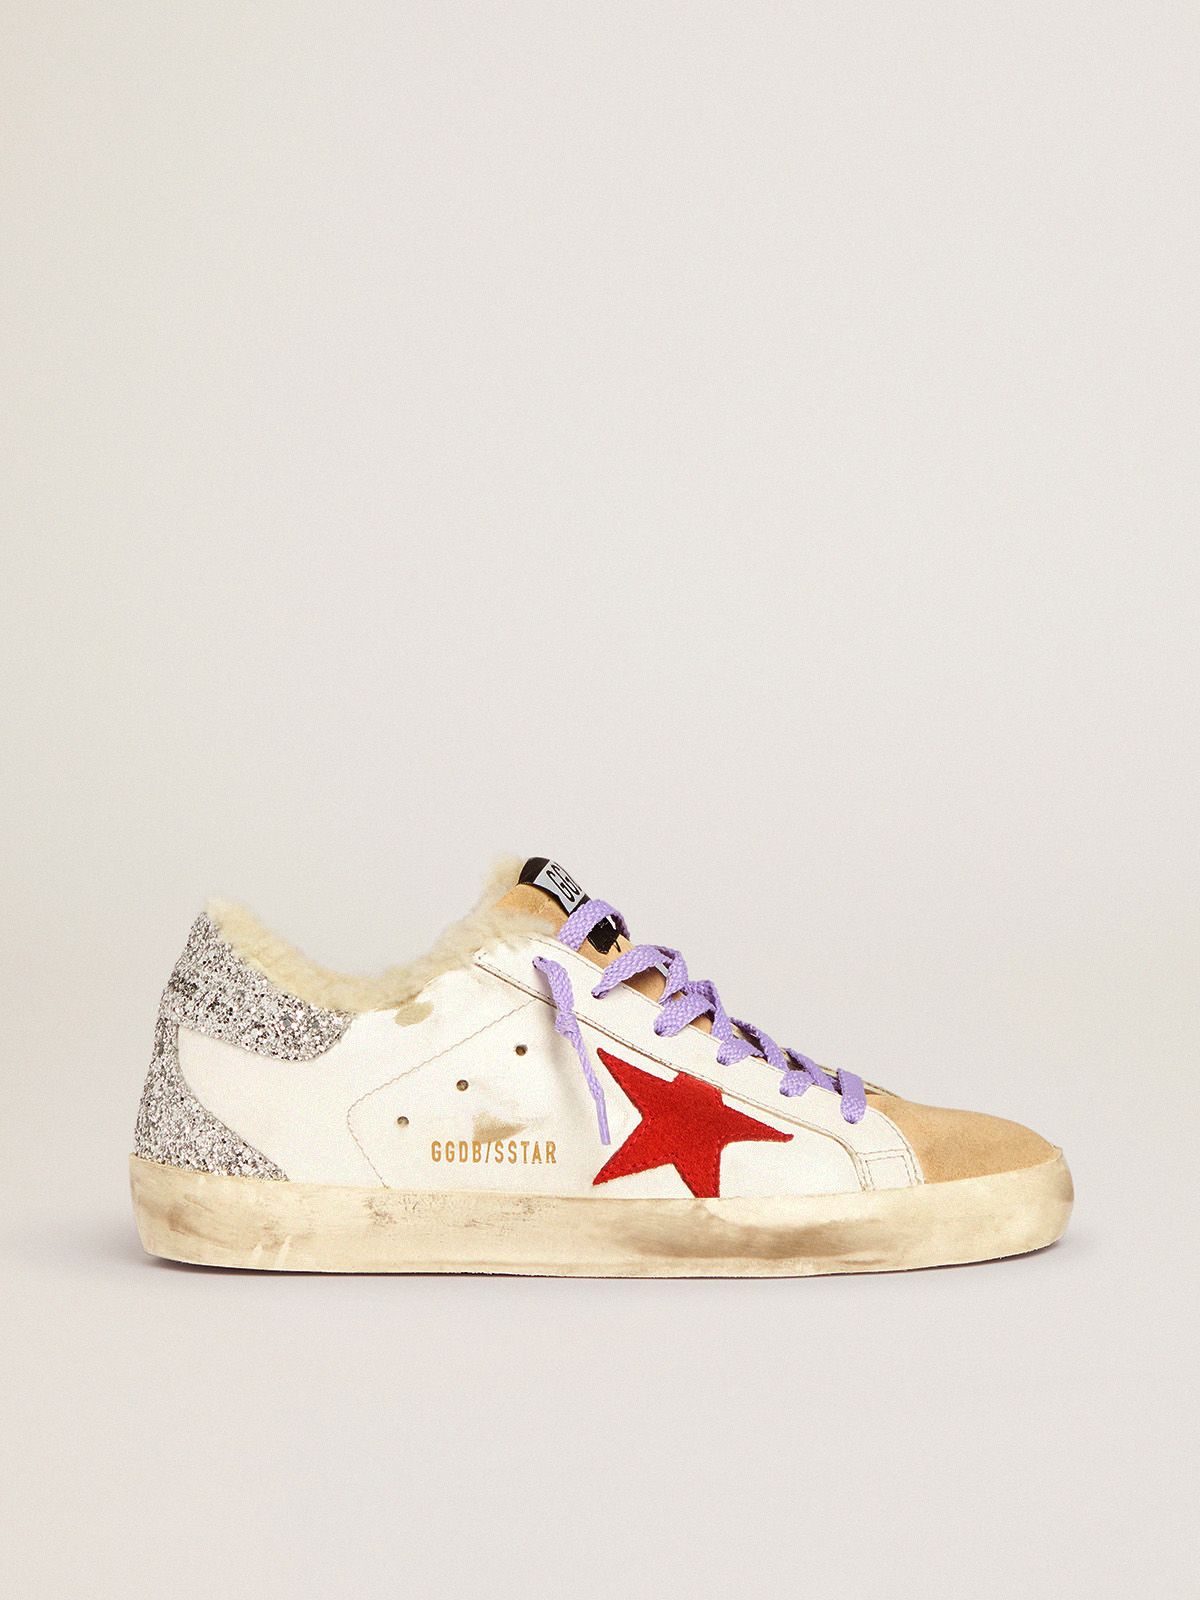 Super-Star sneakers with shearling lining and red suede star